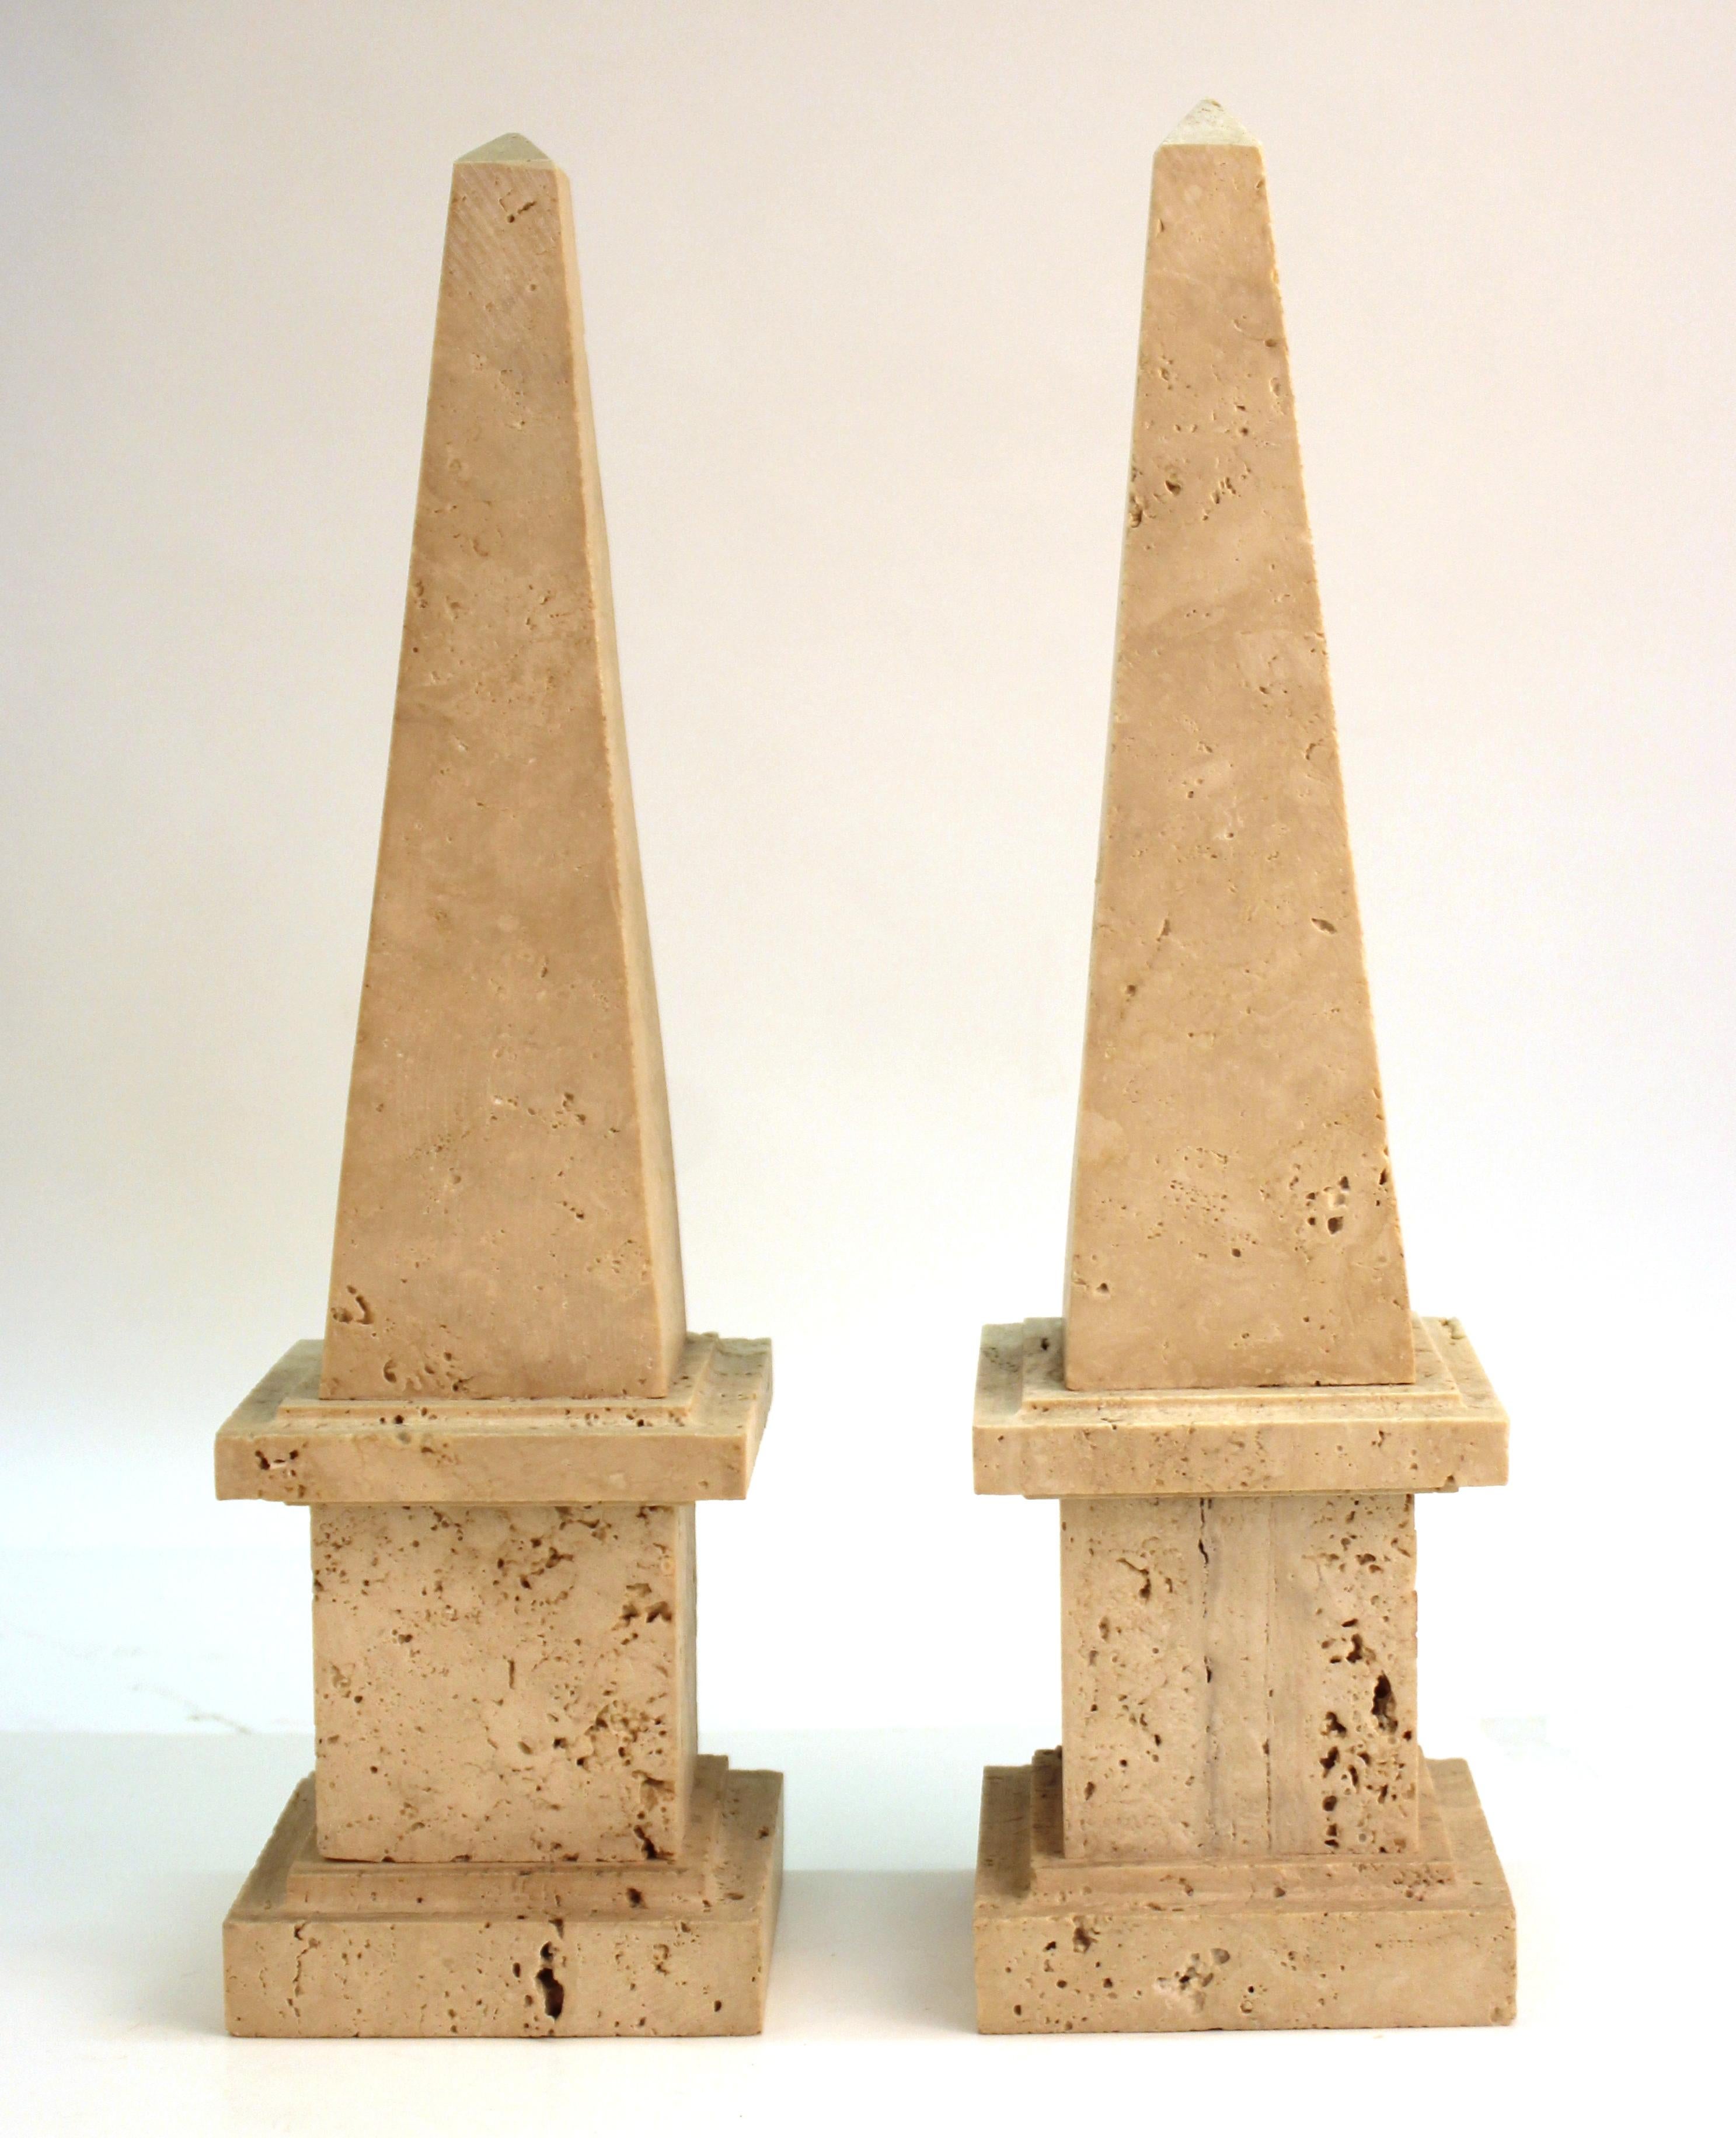 Neoclassical revival pair of stone obelisks. The pair was made in the 20th century and is in great vintage condition, with age-appropriate wear to the surfaces.